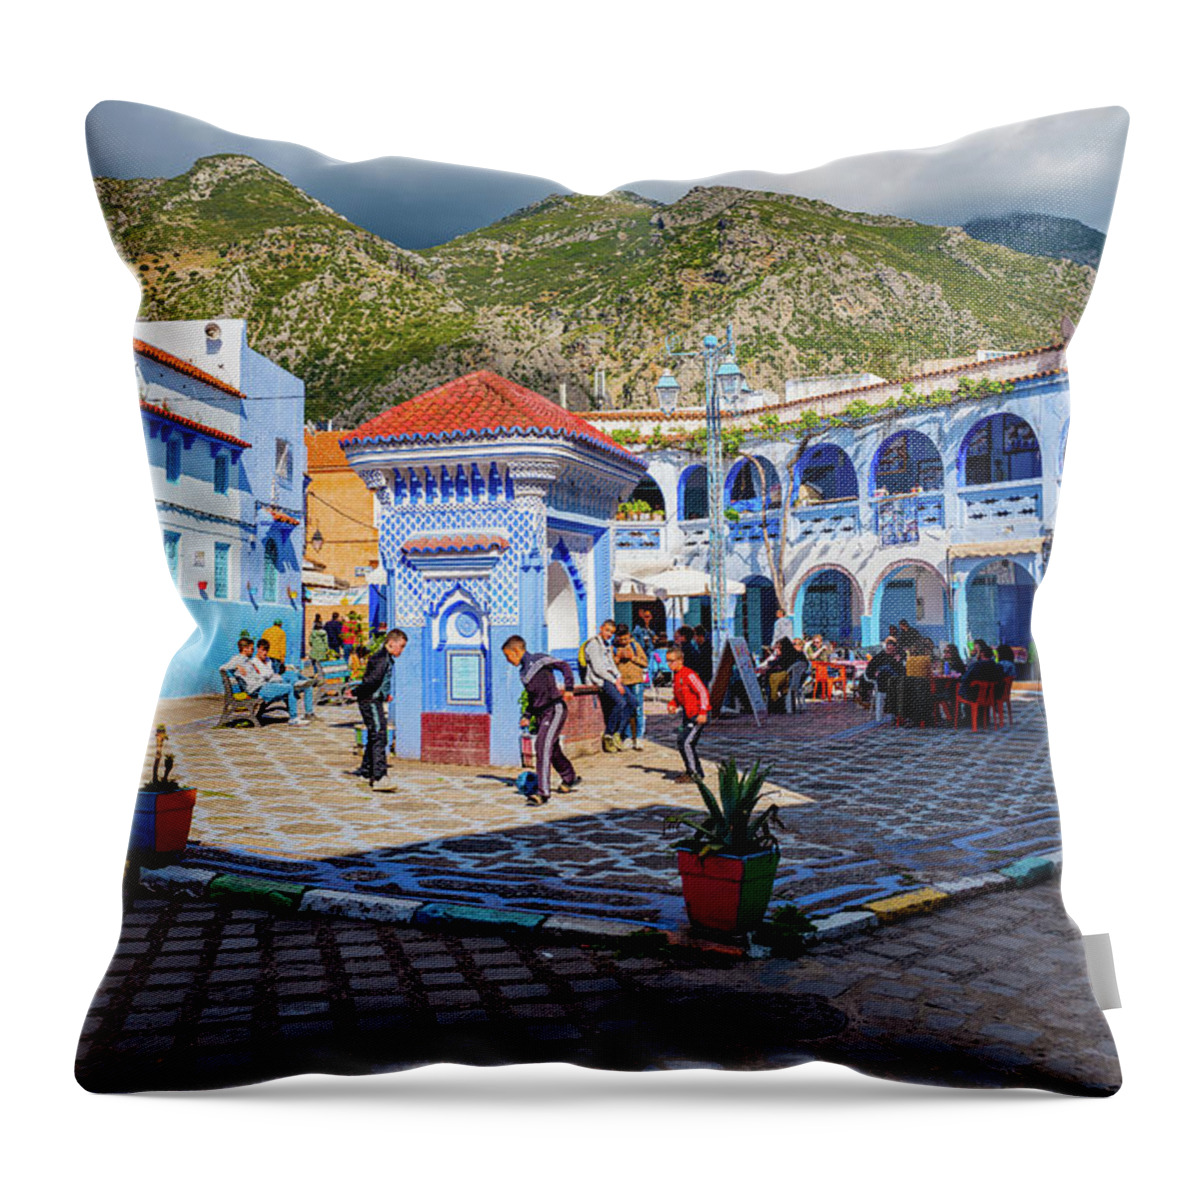 Africa Throw Pillow featuring the photograph Central Park at Chefchaouen by Arj Munoz